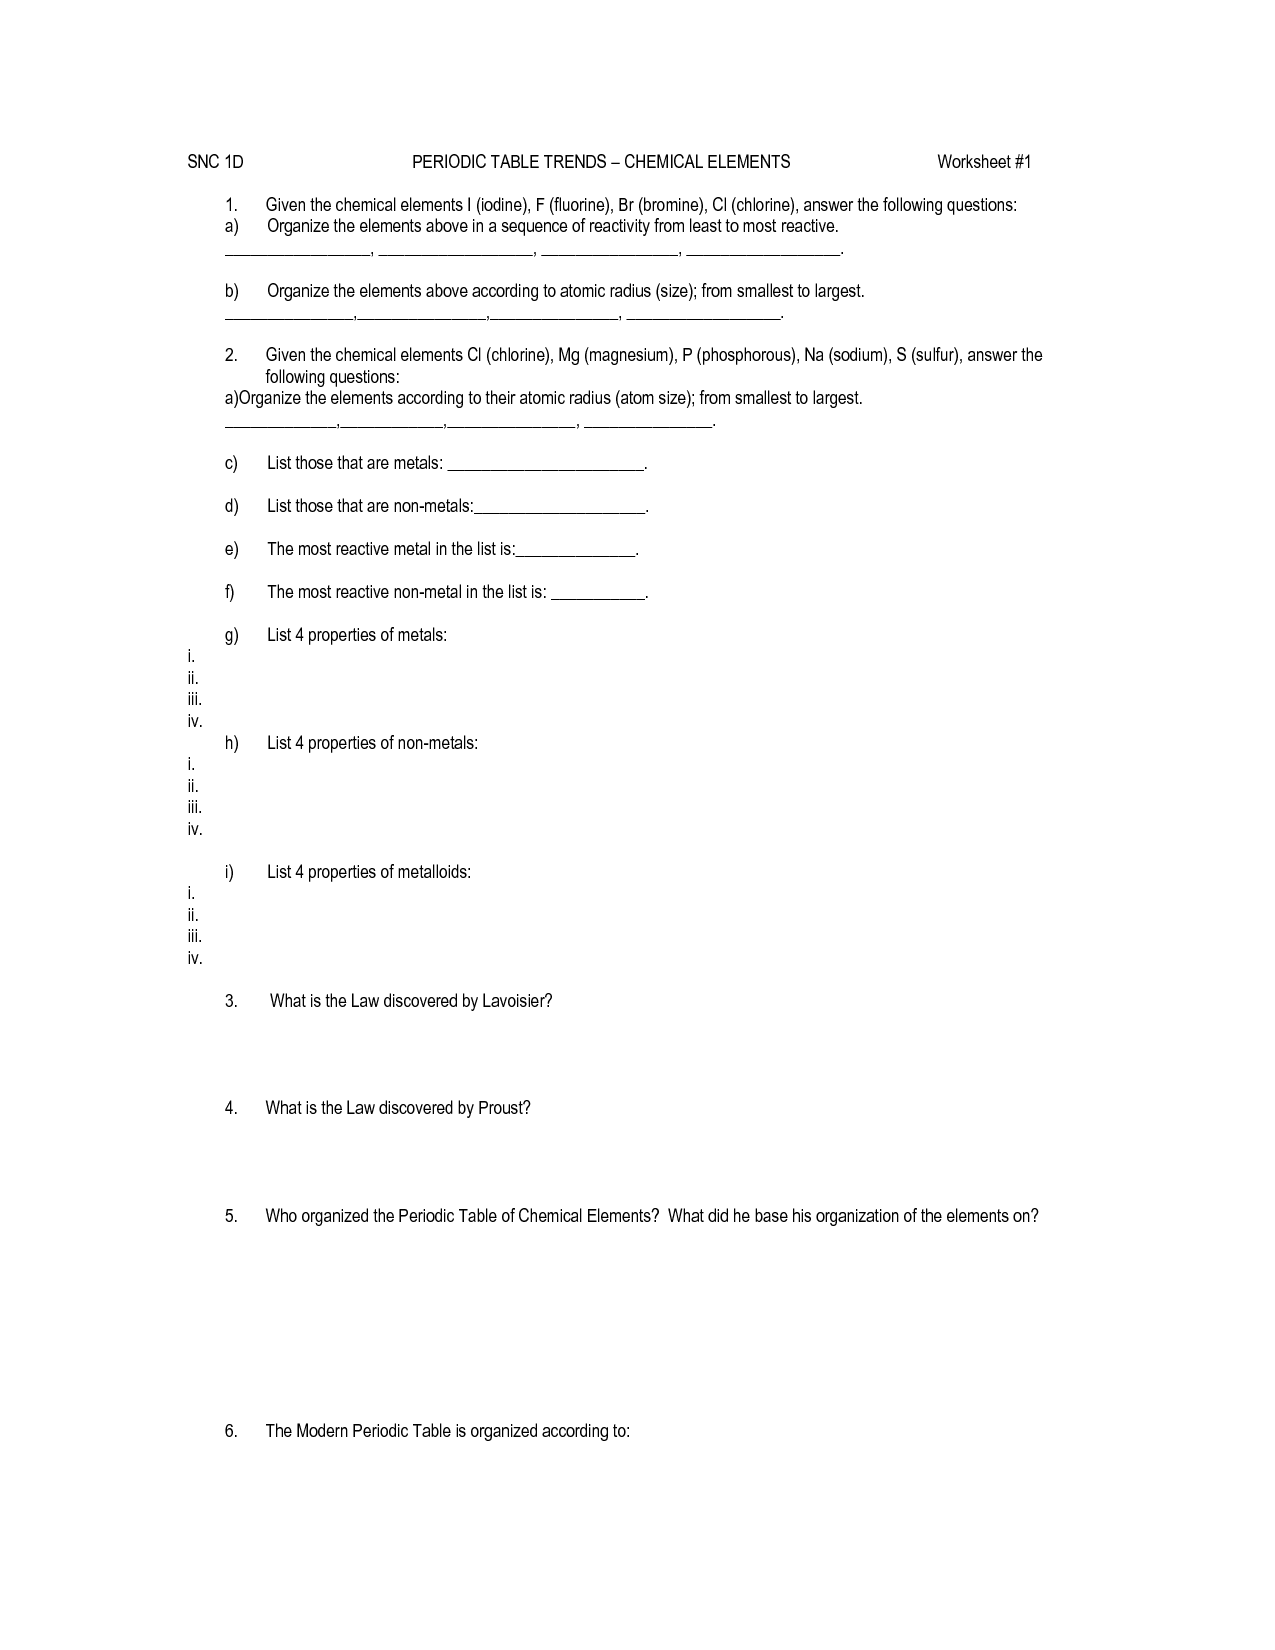 14 Best Images of Alien Periodic Table Worksheet Answers  Alien Periodic Table Answer Key 